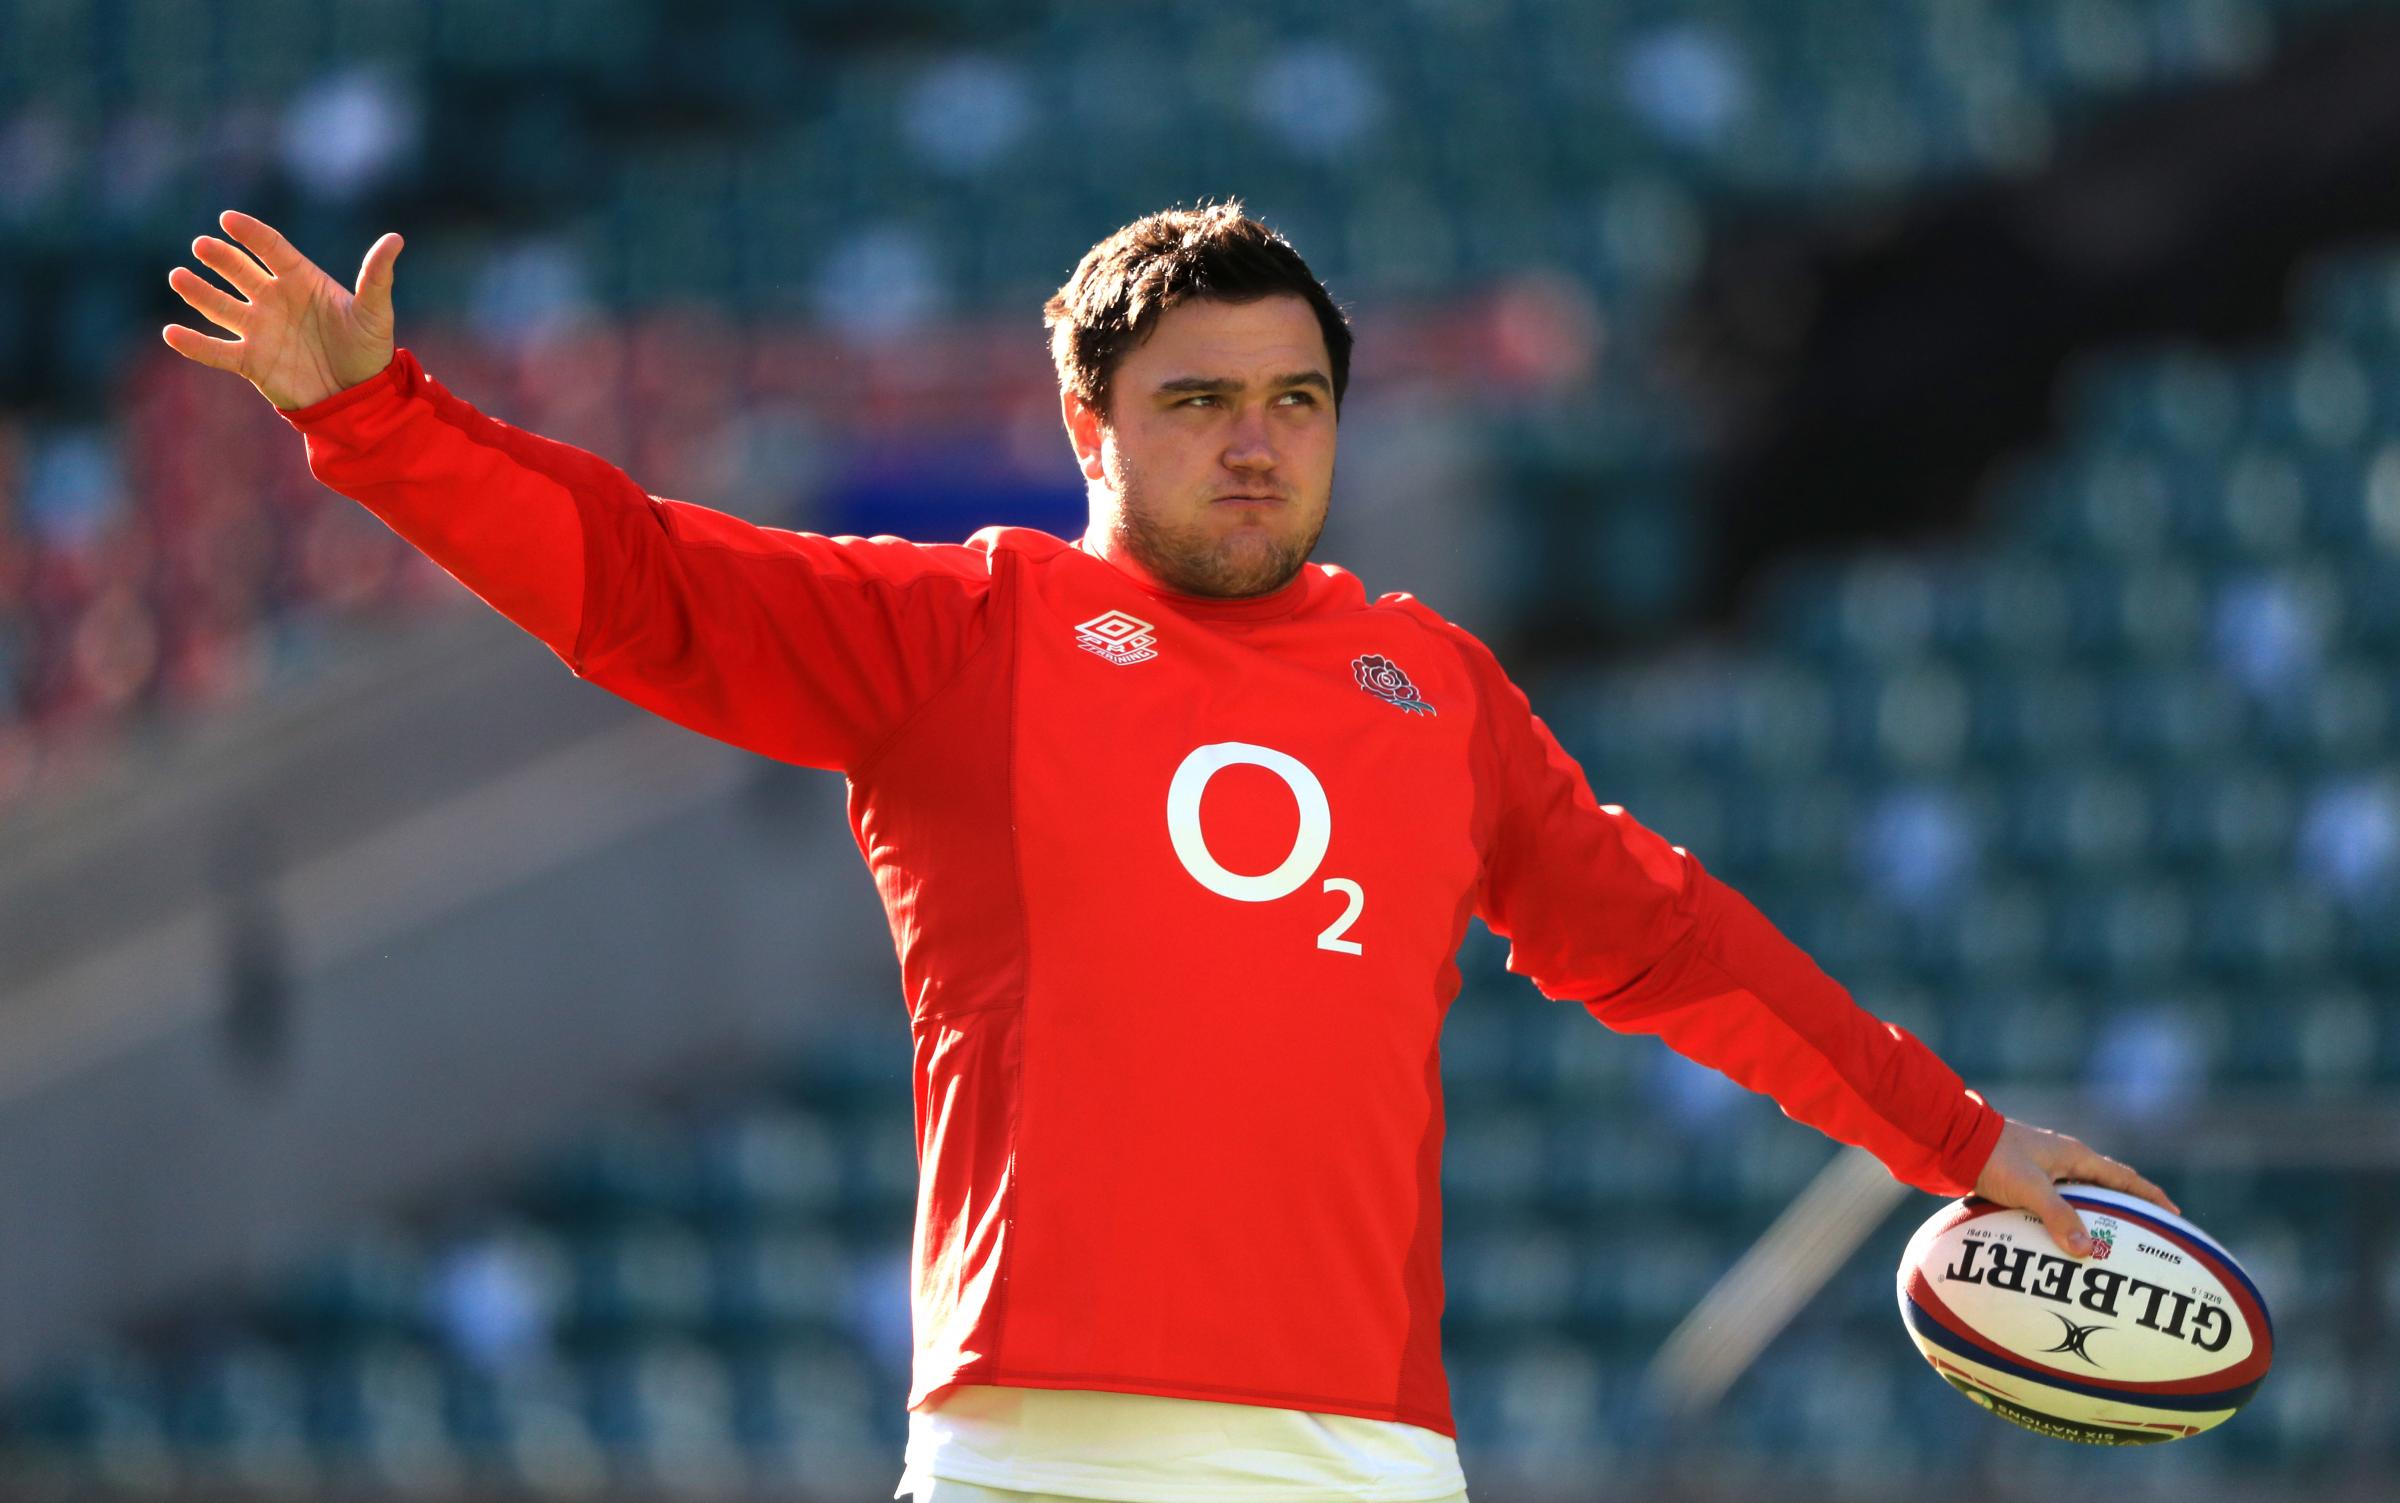 Jamie George pictured at Twickenham stadium in early February. Credit: PA